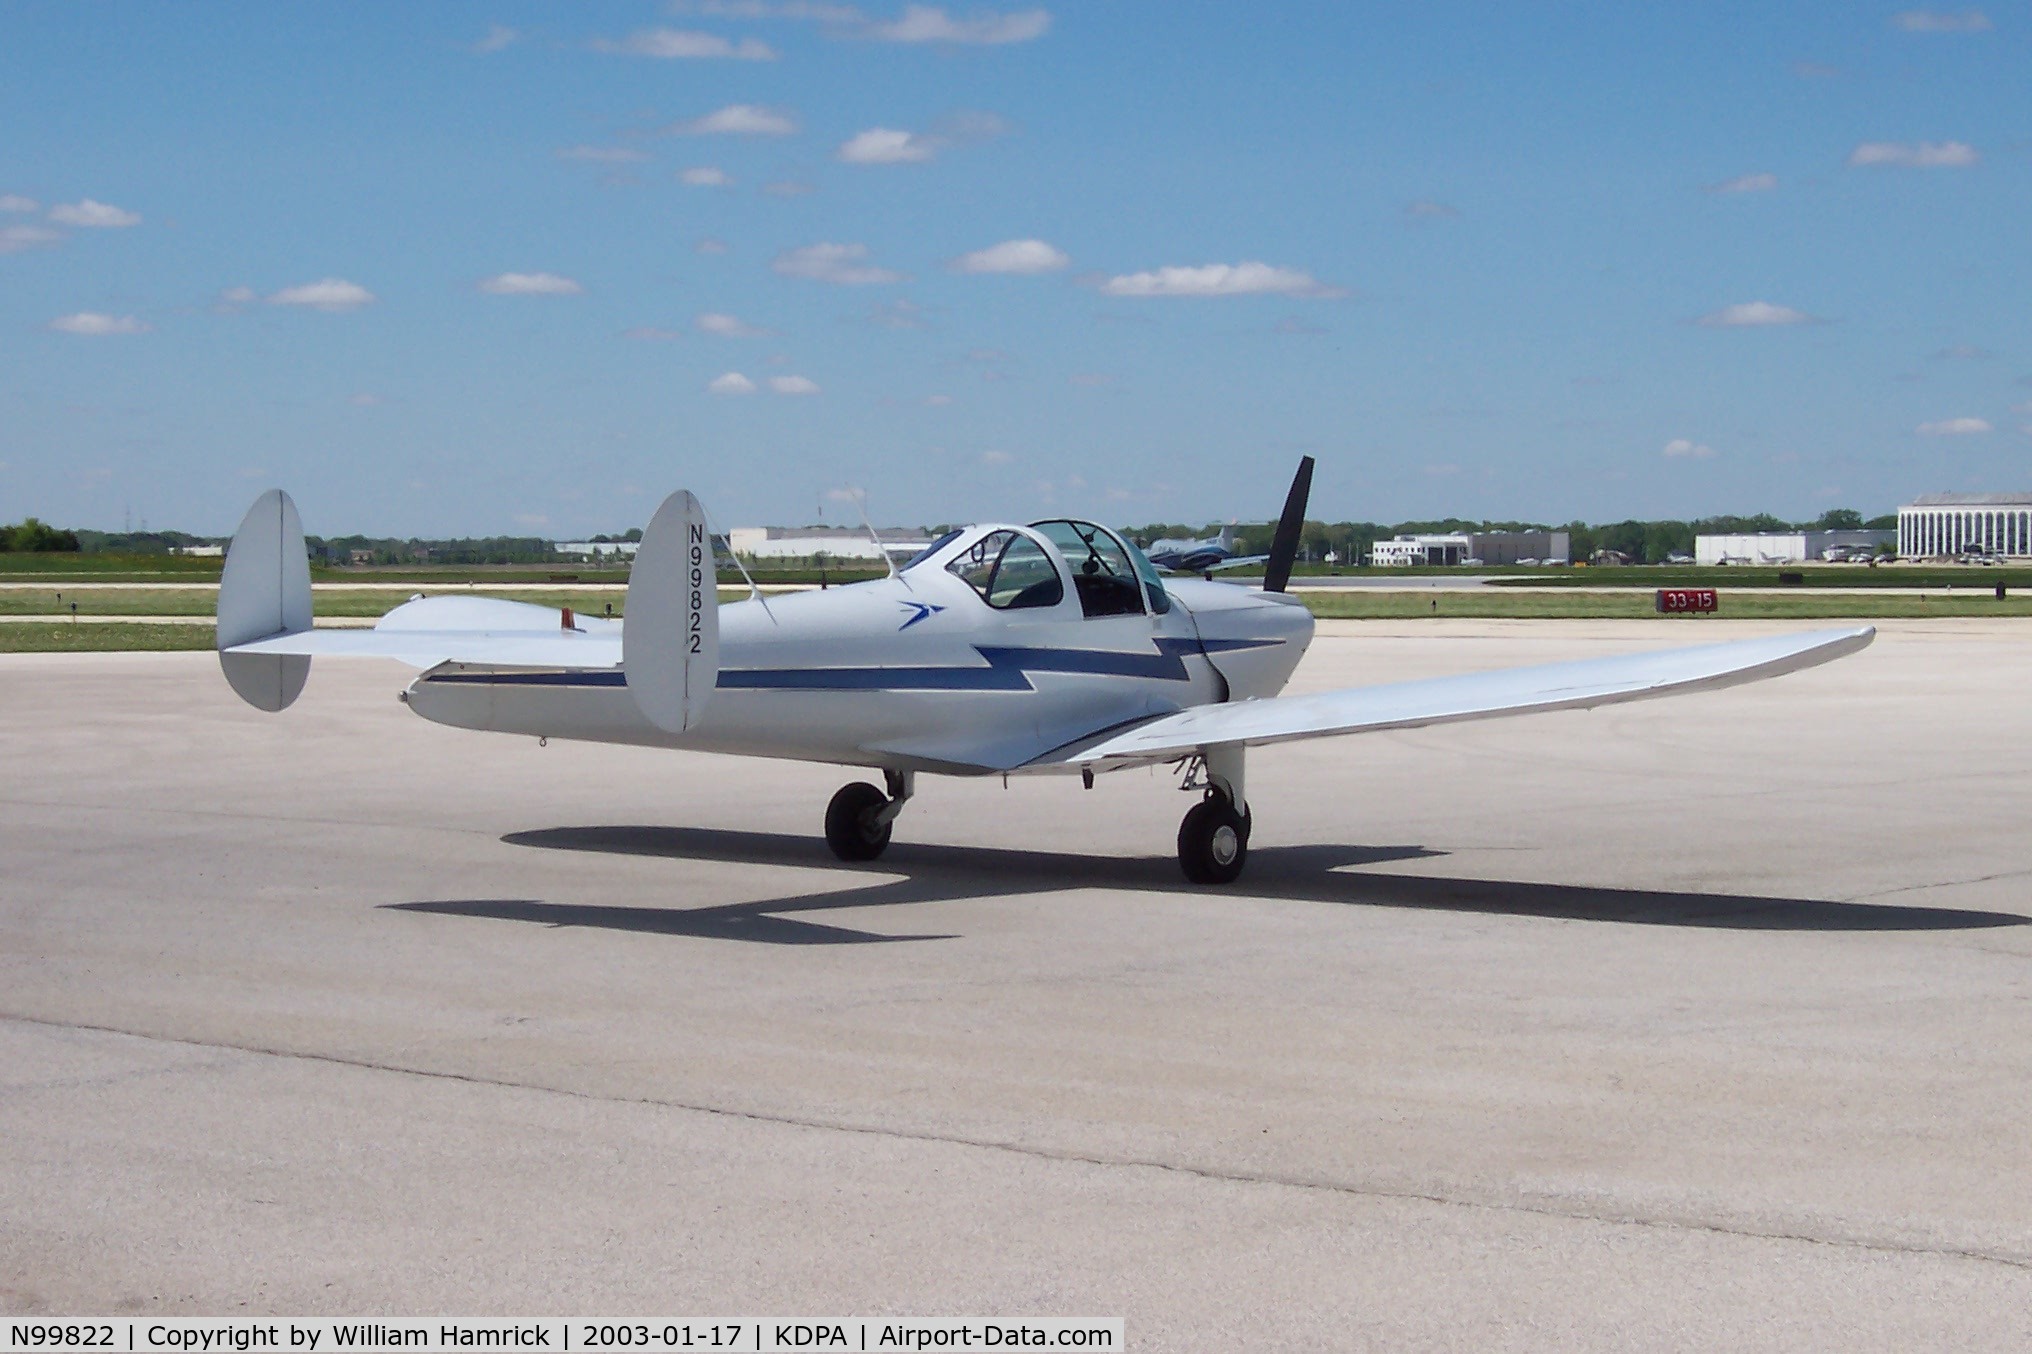 N99822, 1946 Erco 415D Ercoupe C/N 2445, On the Fire Station Ramp at DuPage